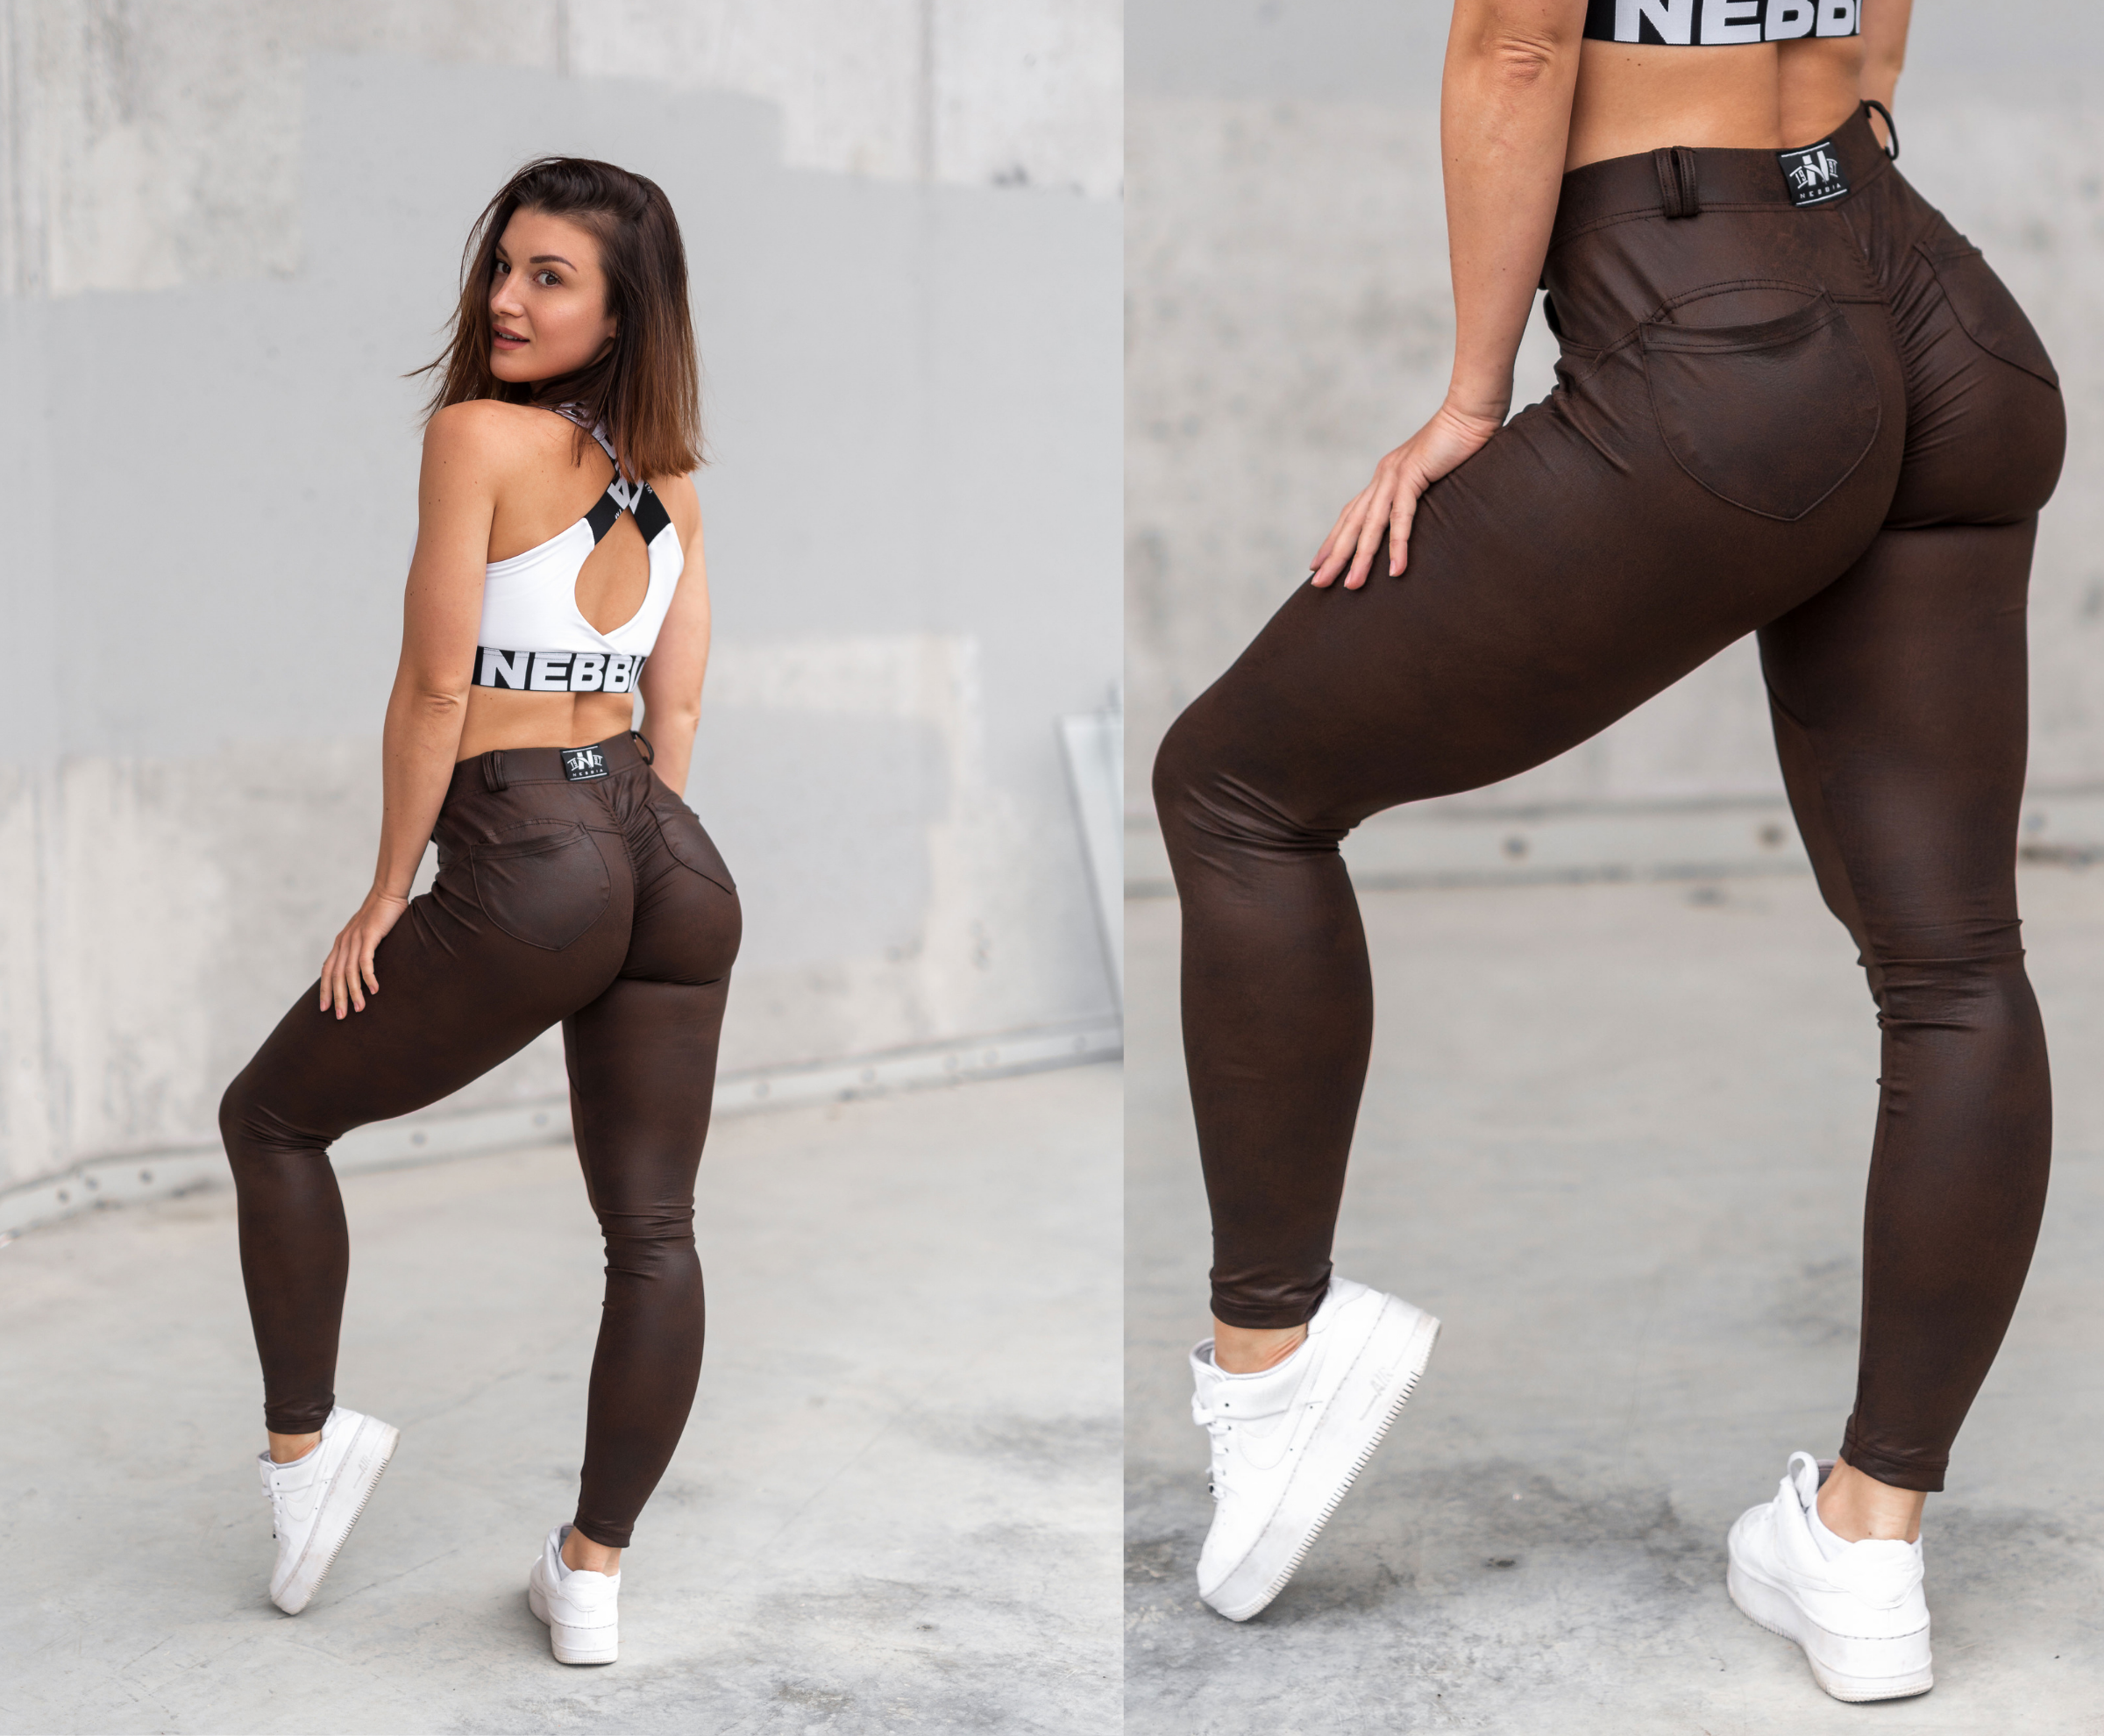 Bubble butt cherry 4 Reasons Why You Need Bubble Butts In Your Closet Nebbia